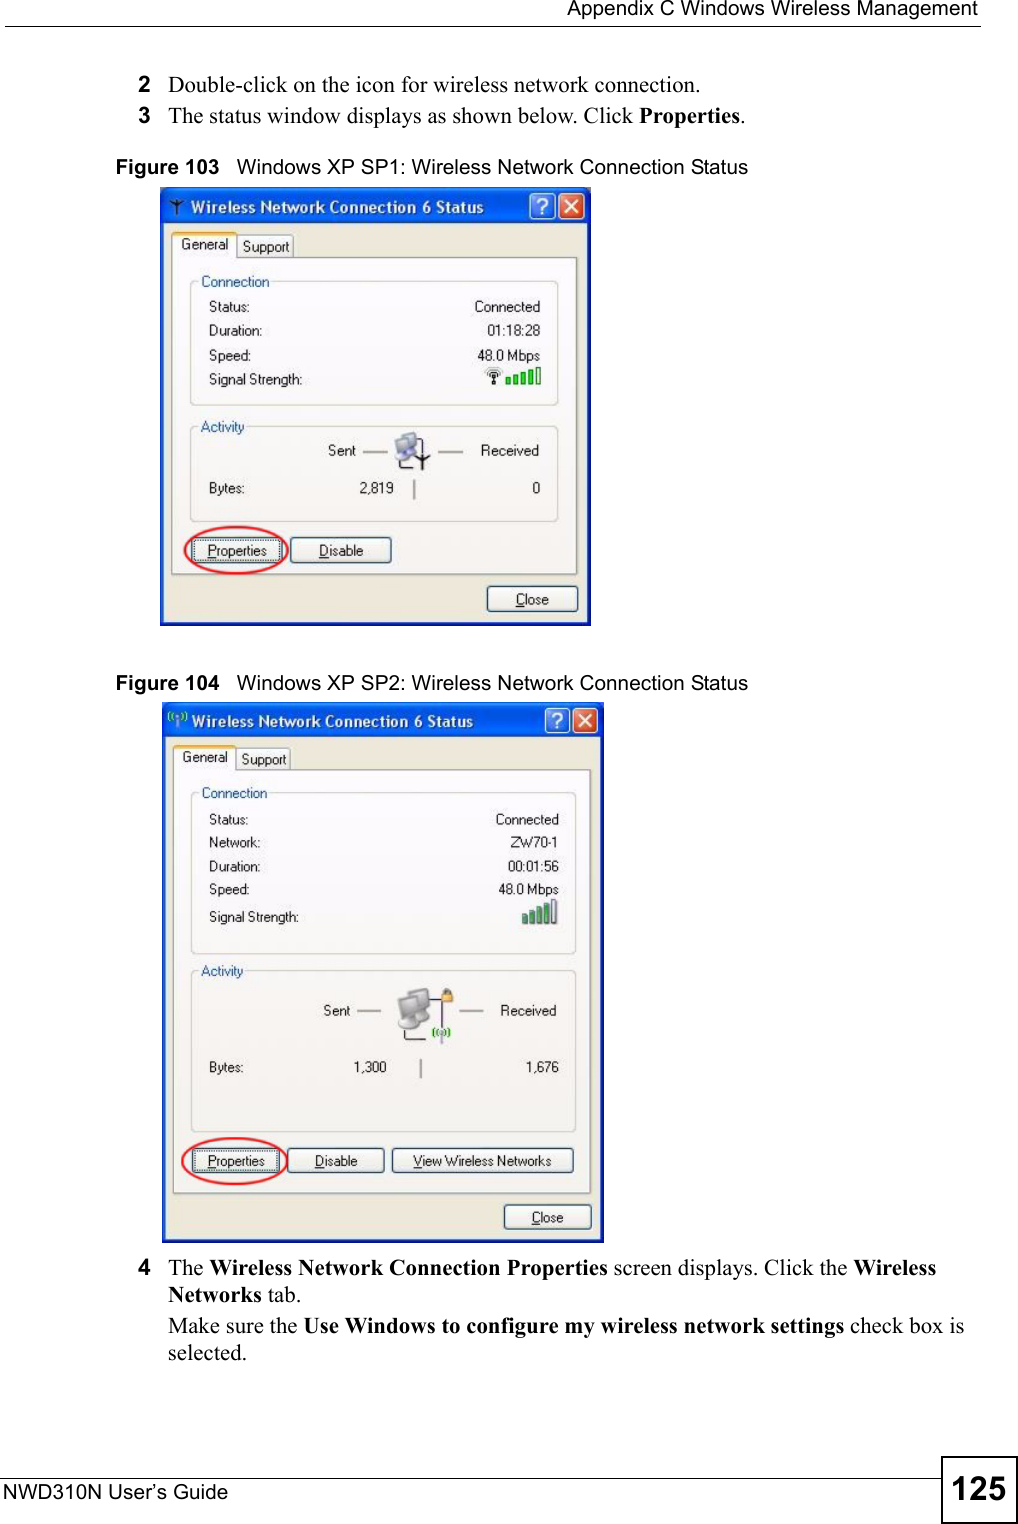  Appendix C Windows Wireless ManagementNWD310N User’s Guide 1252Double-click on the icon for wireless network connection.3The status window displays as shown below. Click Properties.Figure 103   Windows XP SP1: Wireless Network Connection StatusFigure 104   Windows XP SP2: Wireless Network Connection Status4The Wireless Network Connection Properties screen displays. Click the Wireless Networks tab.Make sure the Use Windows to configure my wireless network settings check box is selected.  